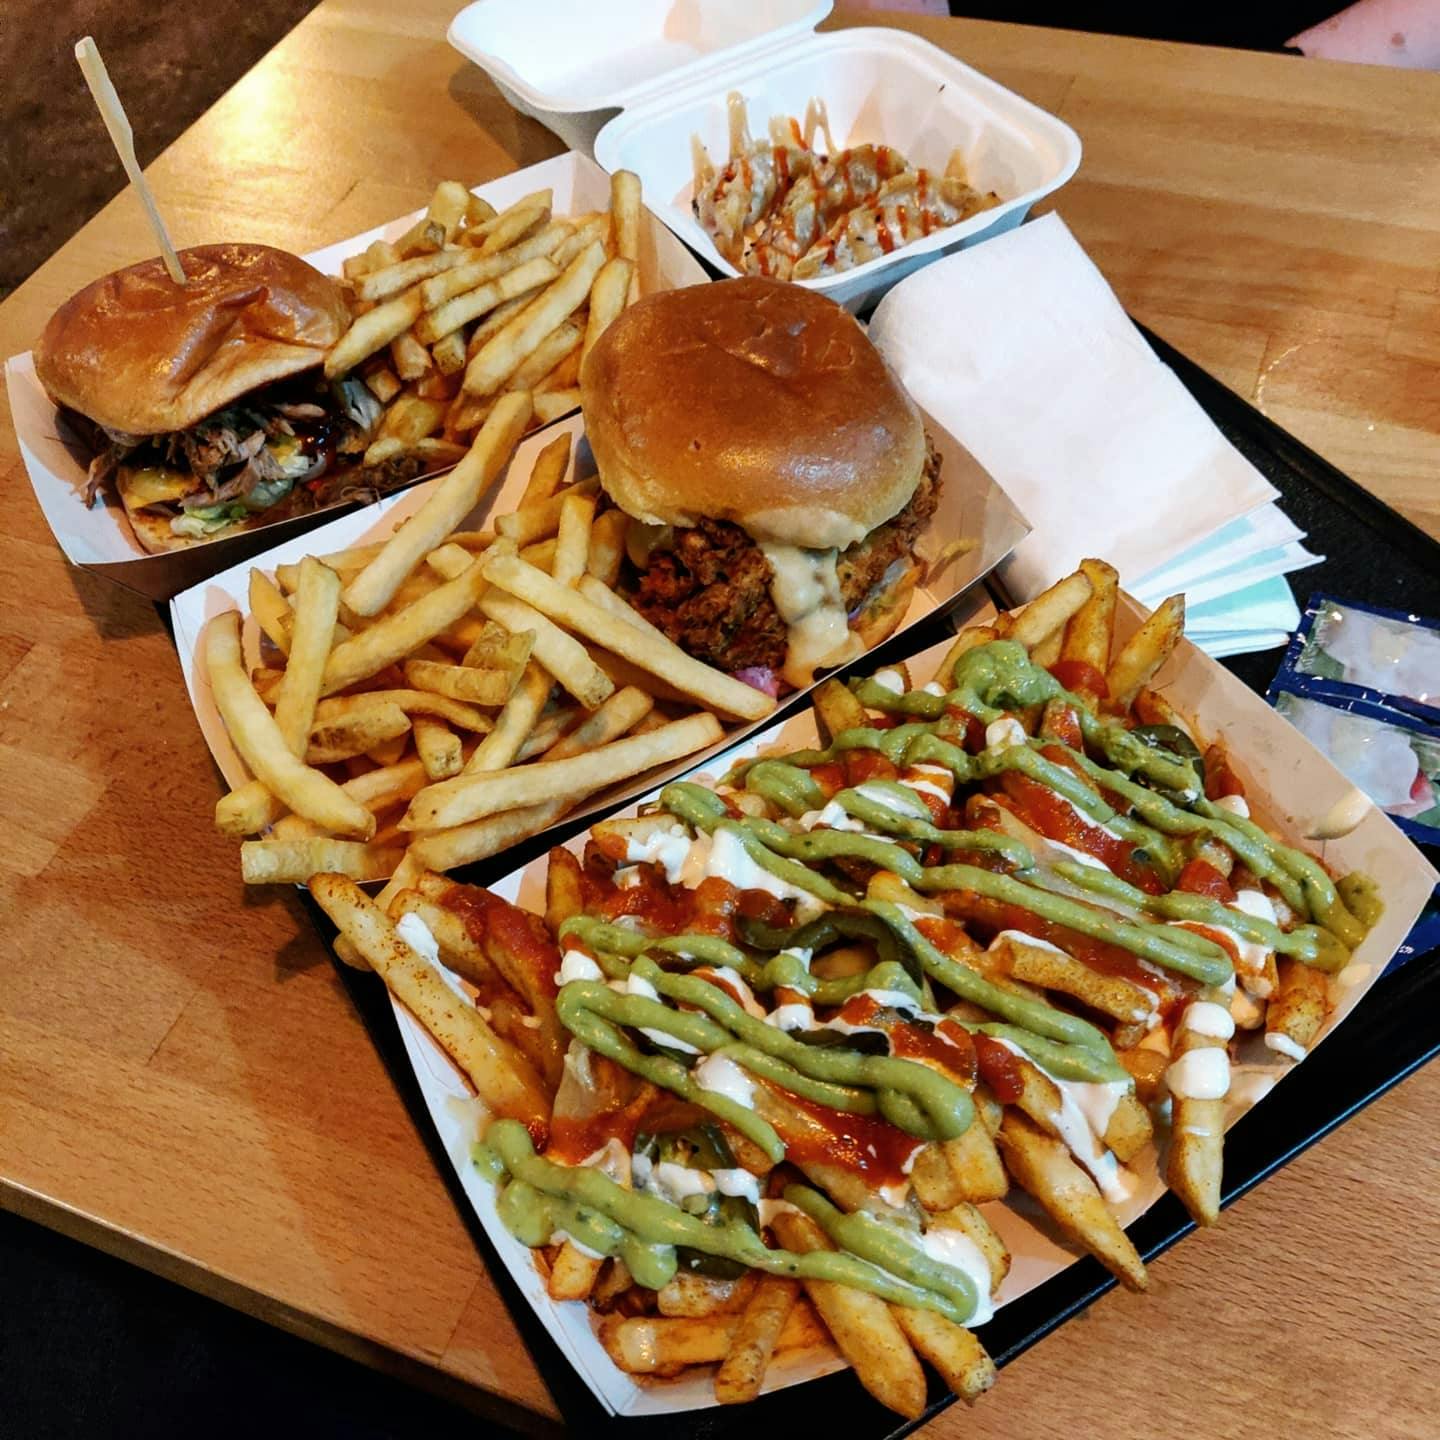 Burger and loaded fries from Twisted Burger Company at Triple Point Brewery